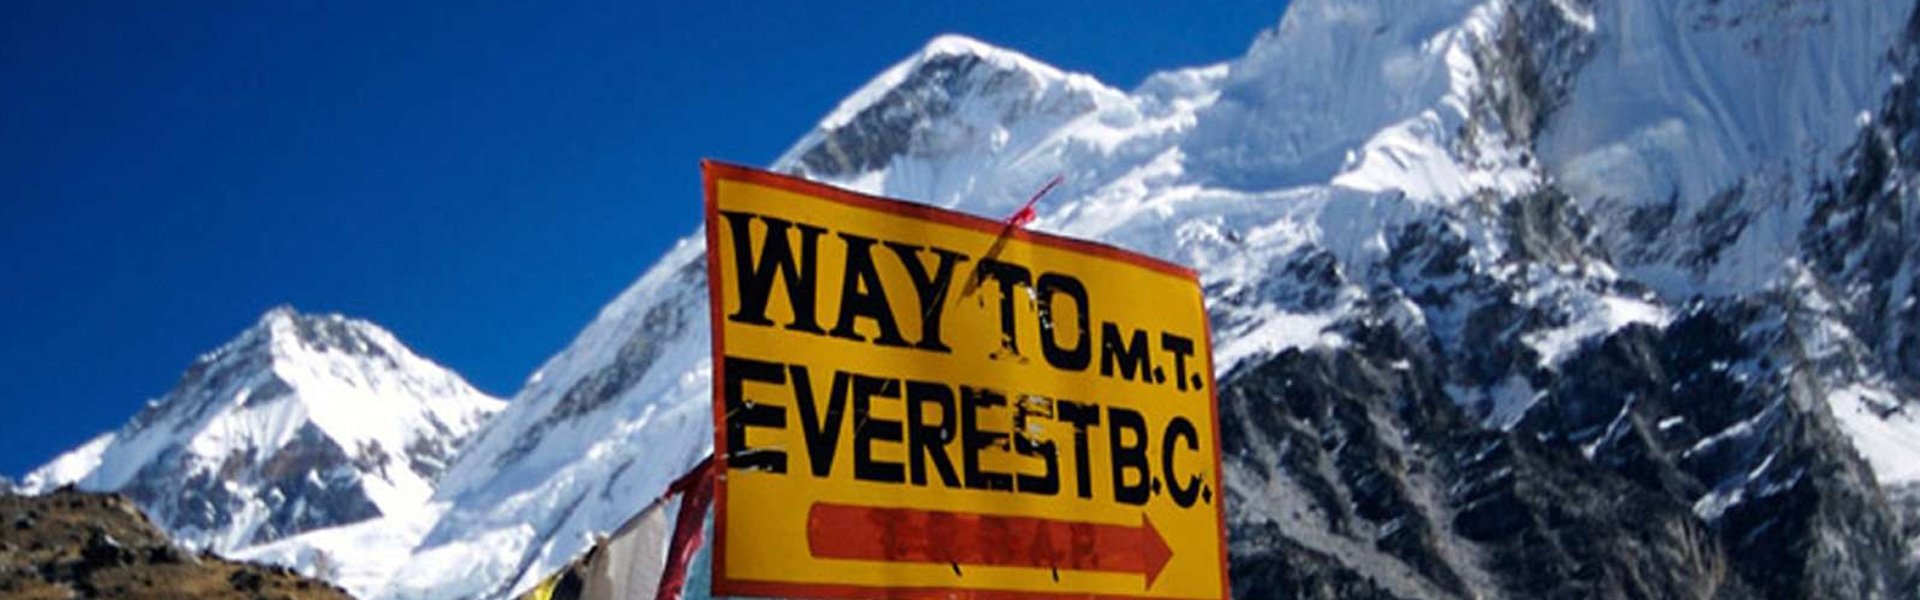 Top 7 Reasons To Do Everest Base Camp Trek